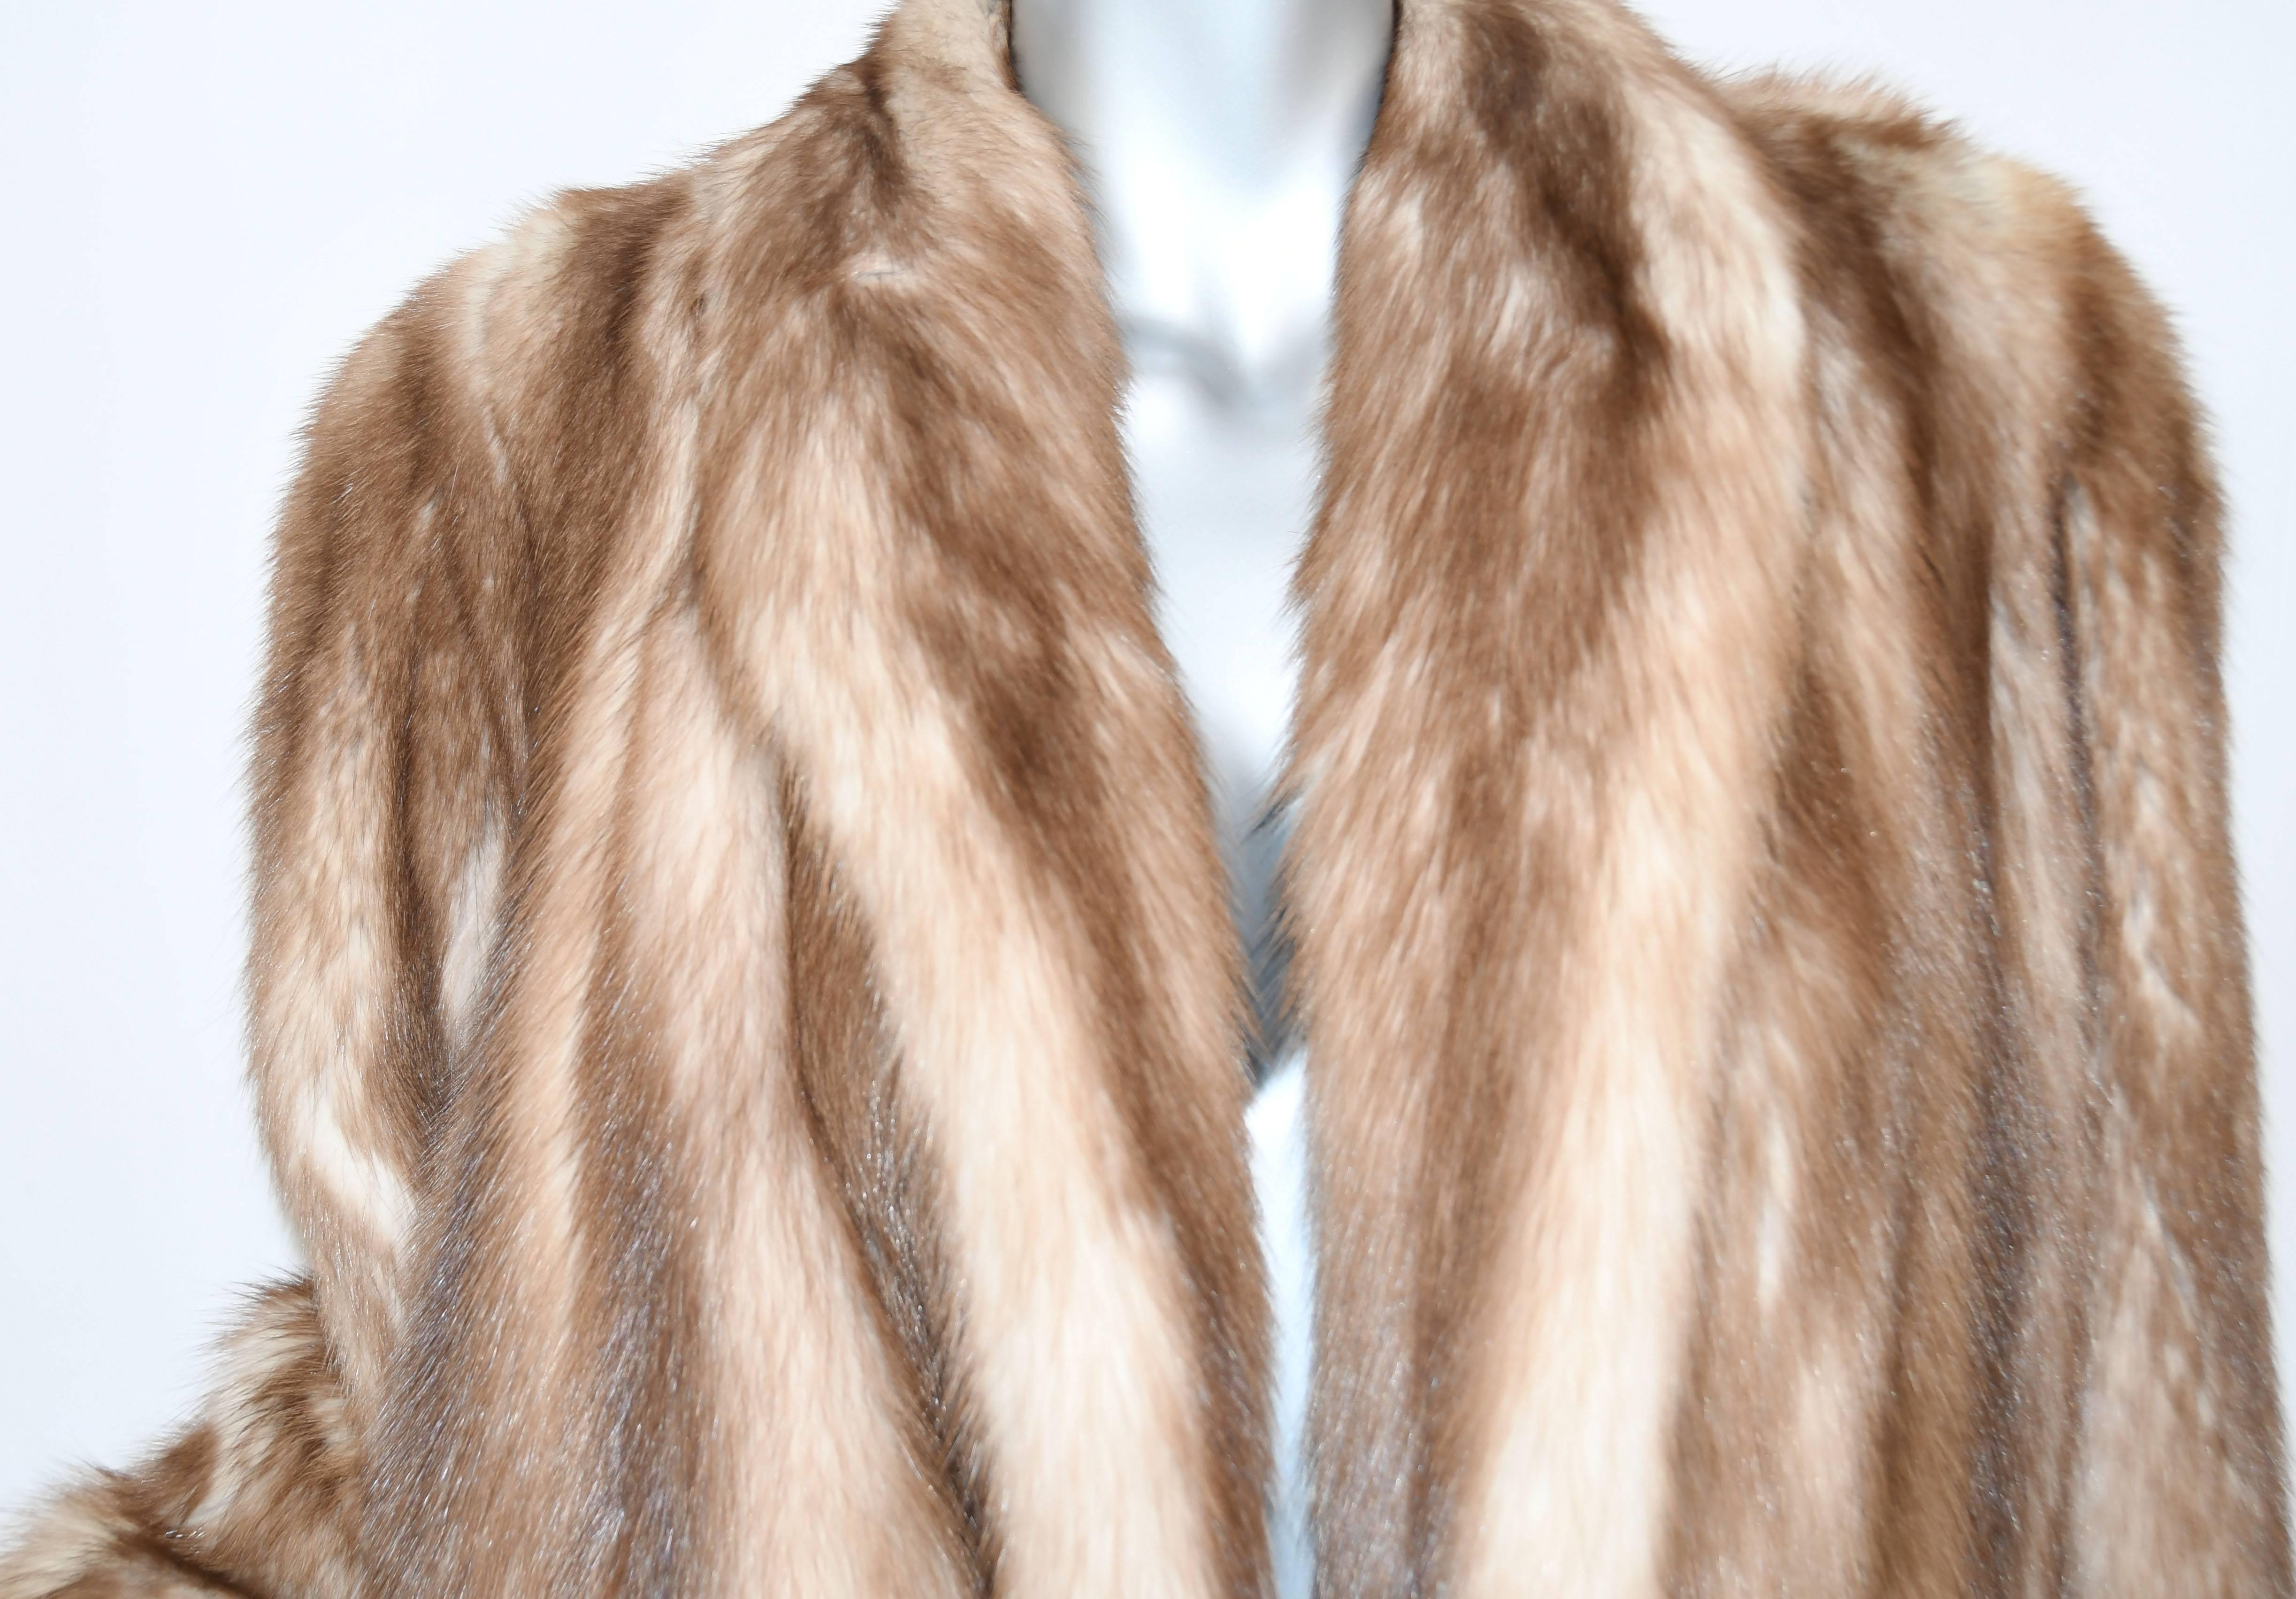 Refined and classic luxurious Stone Marten Fur long jacket.  Full shawl collar with long sleeves lined in silk.  Make a statement of elegance in a jacket that will be the star of every occasion.  Pockets lined in velvet. No size tag but fits XS/S.